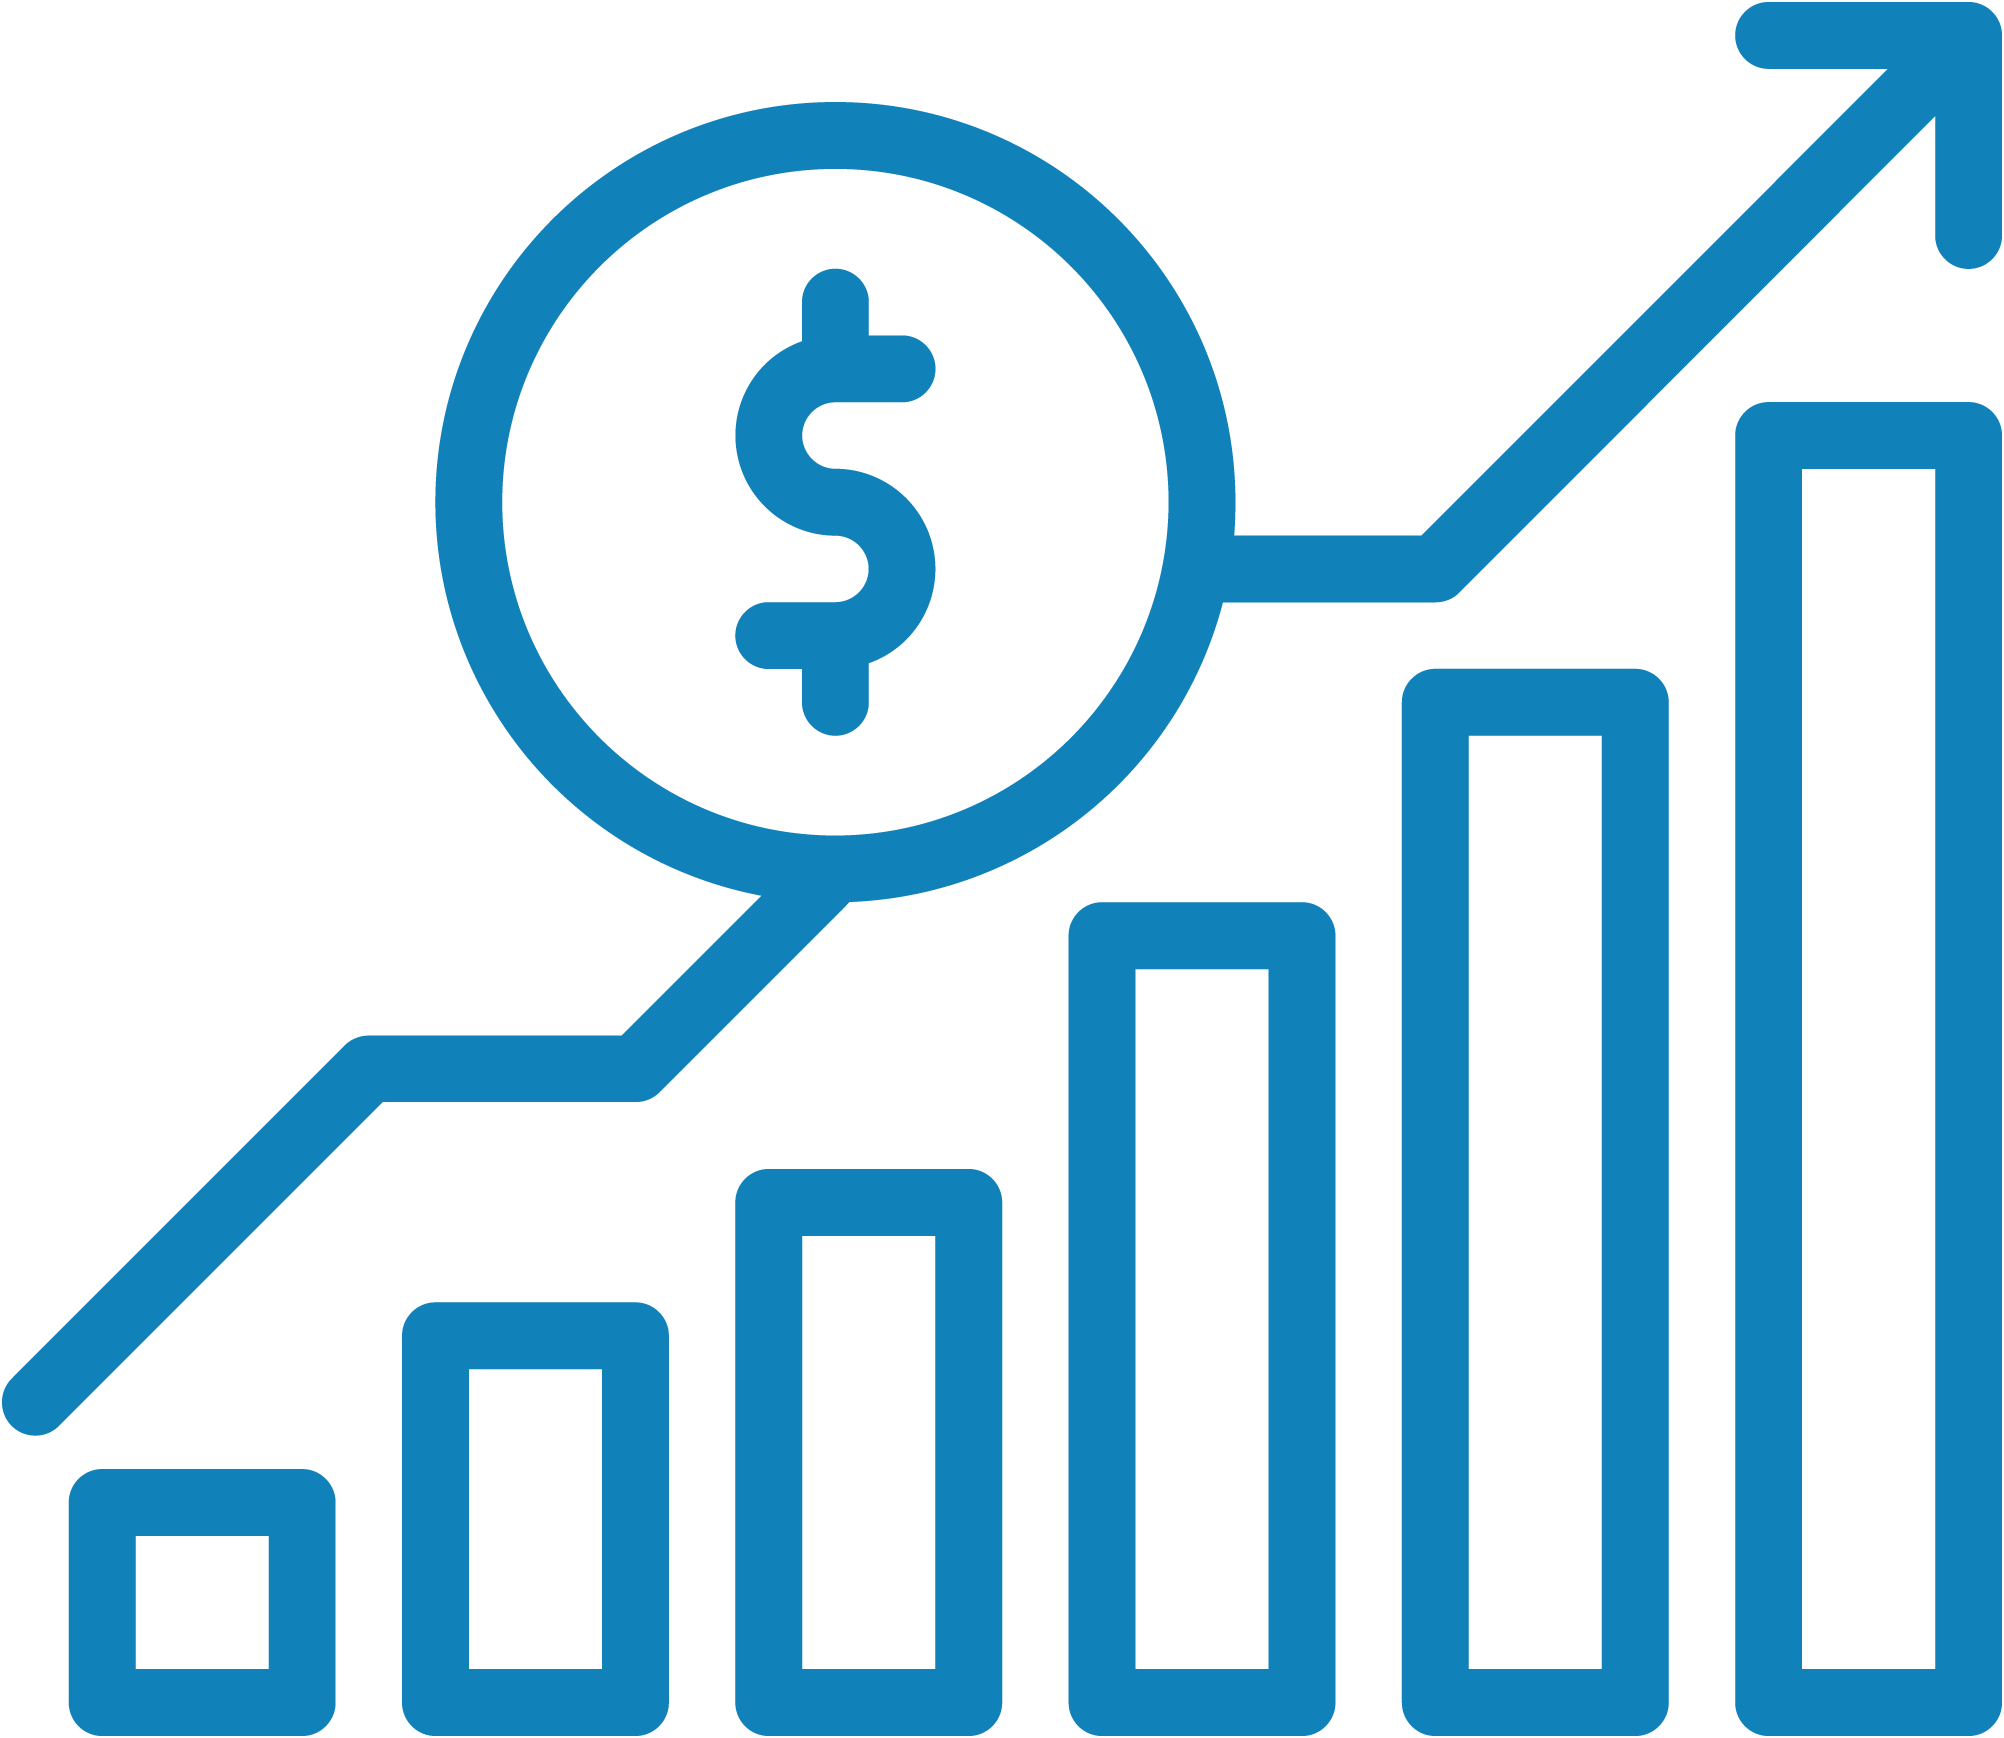 revenue and profit growth